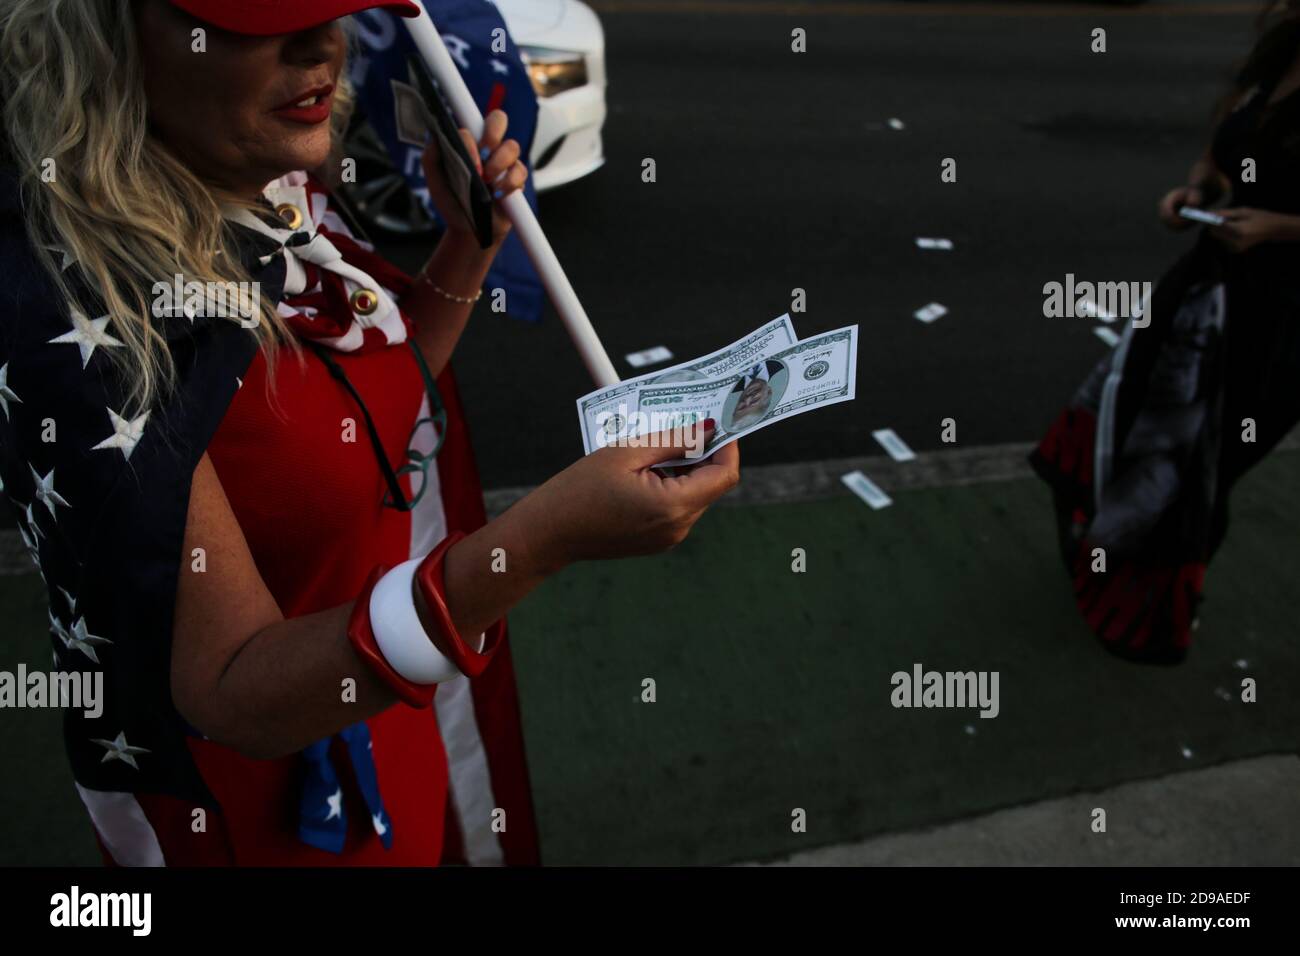 A Trump support holds fake dollar bills with a picture of President Trump on the bills during the Trump rally at Beverly Hills Garden Park.On the night of the United States Presidential Election on Tuesday, November 3, 2020, supporters of President Donald Trump met at Beverly Gardens Park in Beverly Hills, California to call for the reelection of Donald Trump. Stock Photo